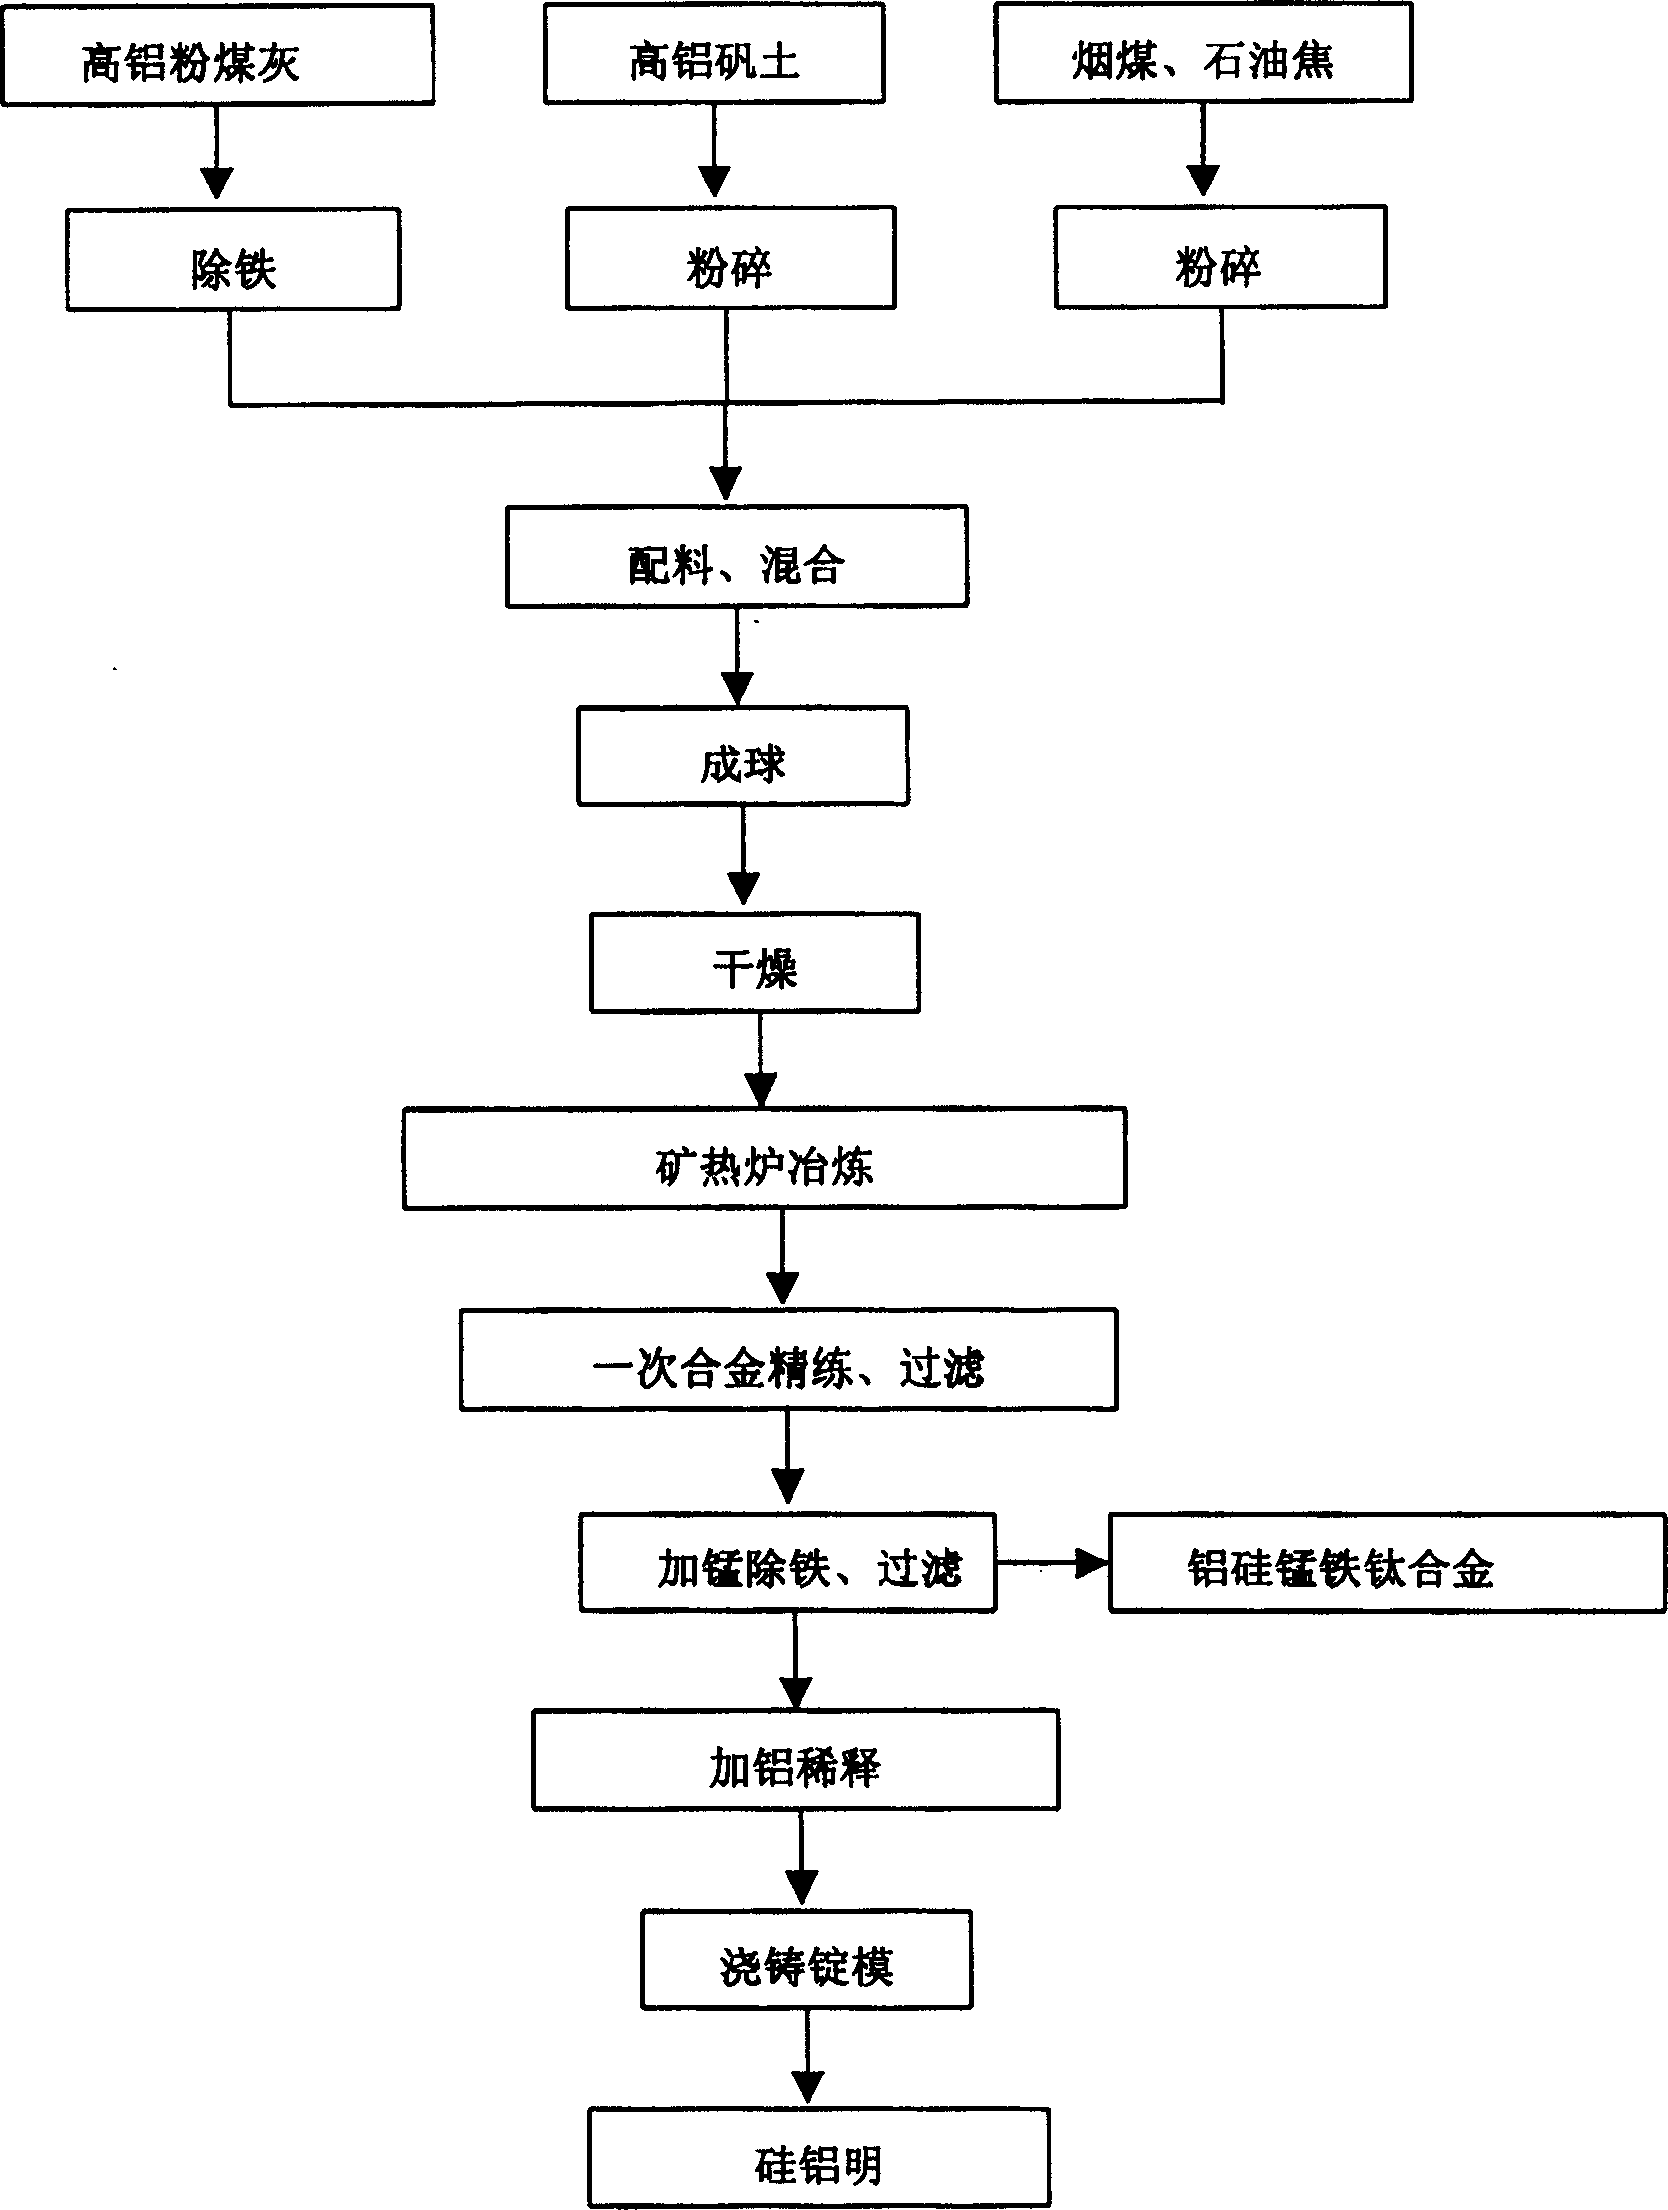 Method for preparing silumin and Al-Si-Mn-Fe-Ti alloy by using high-aluminum fly ash